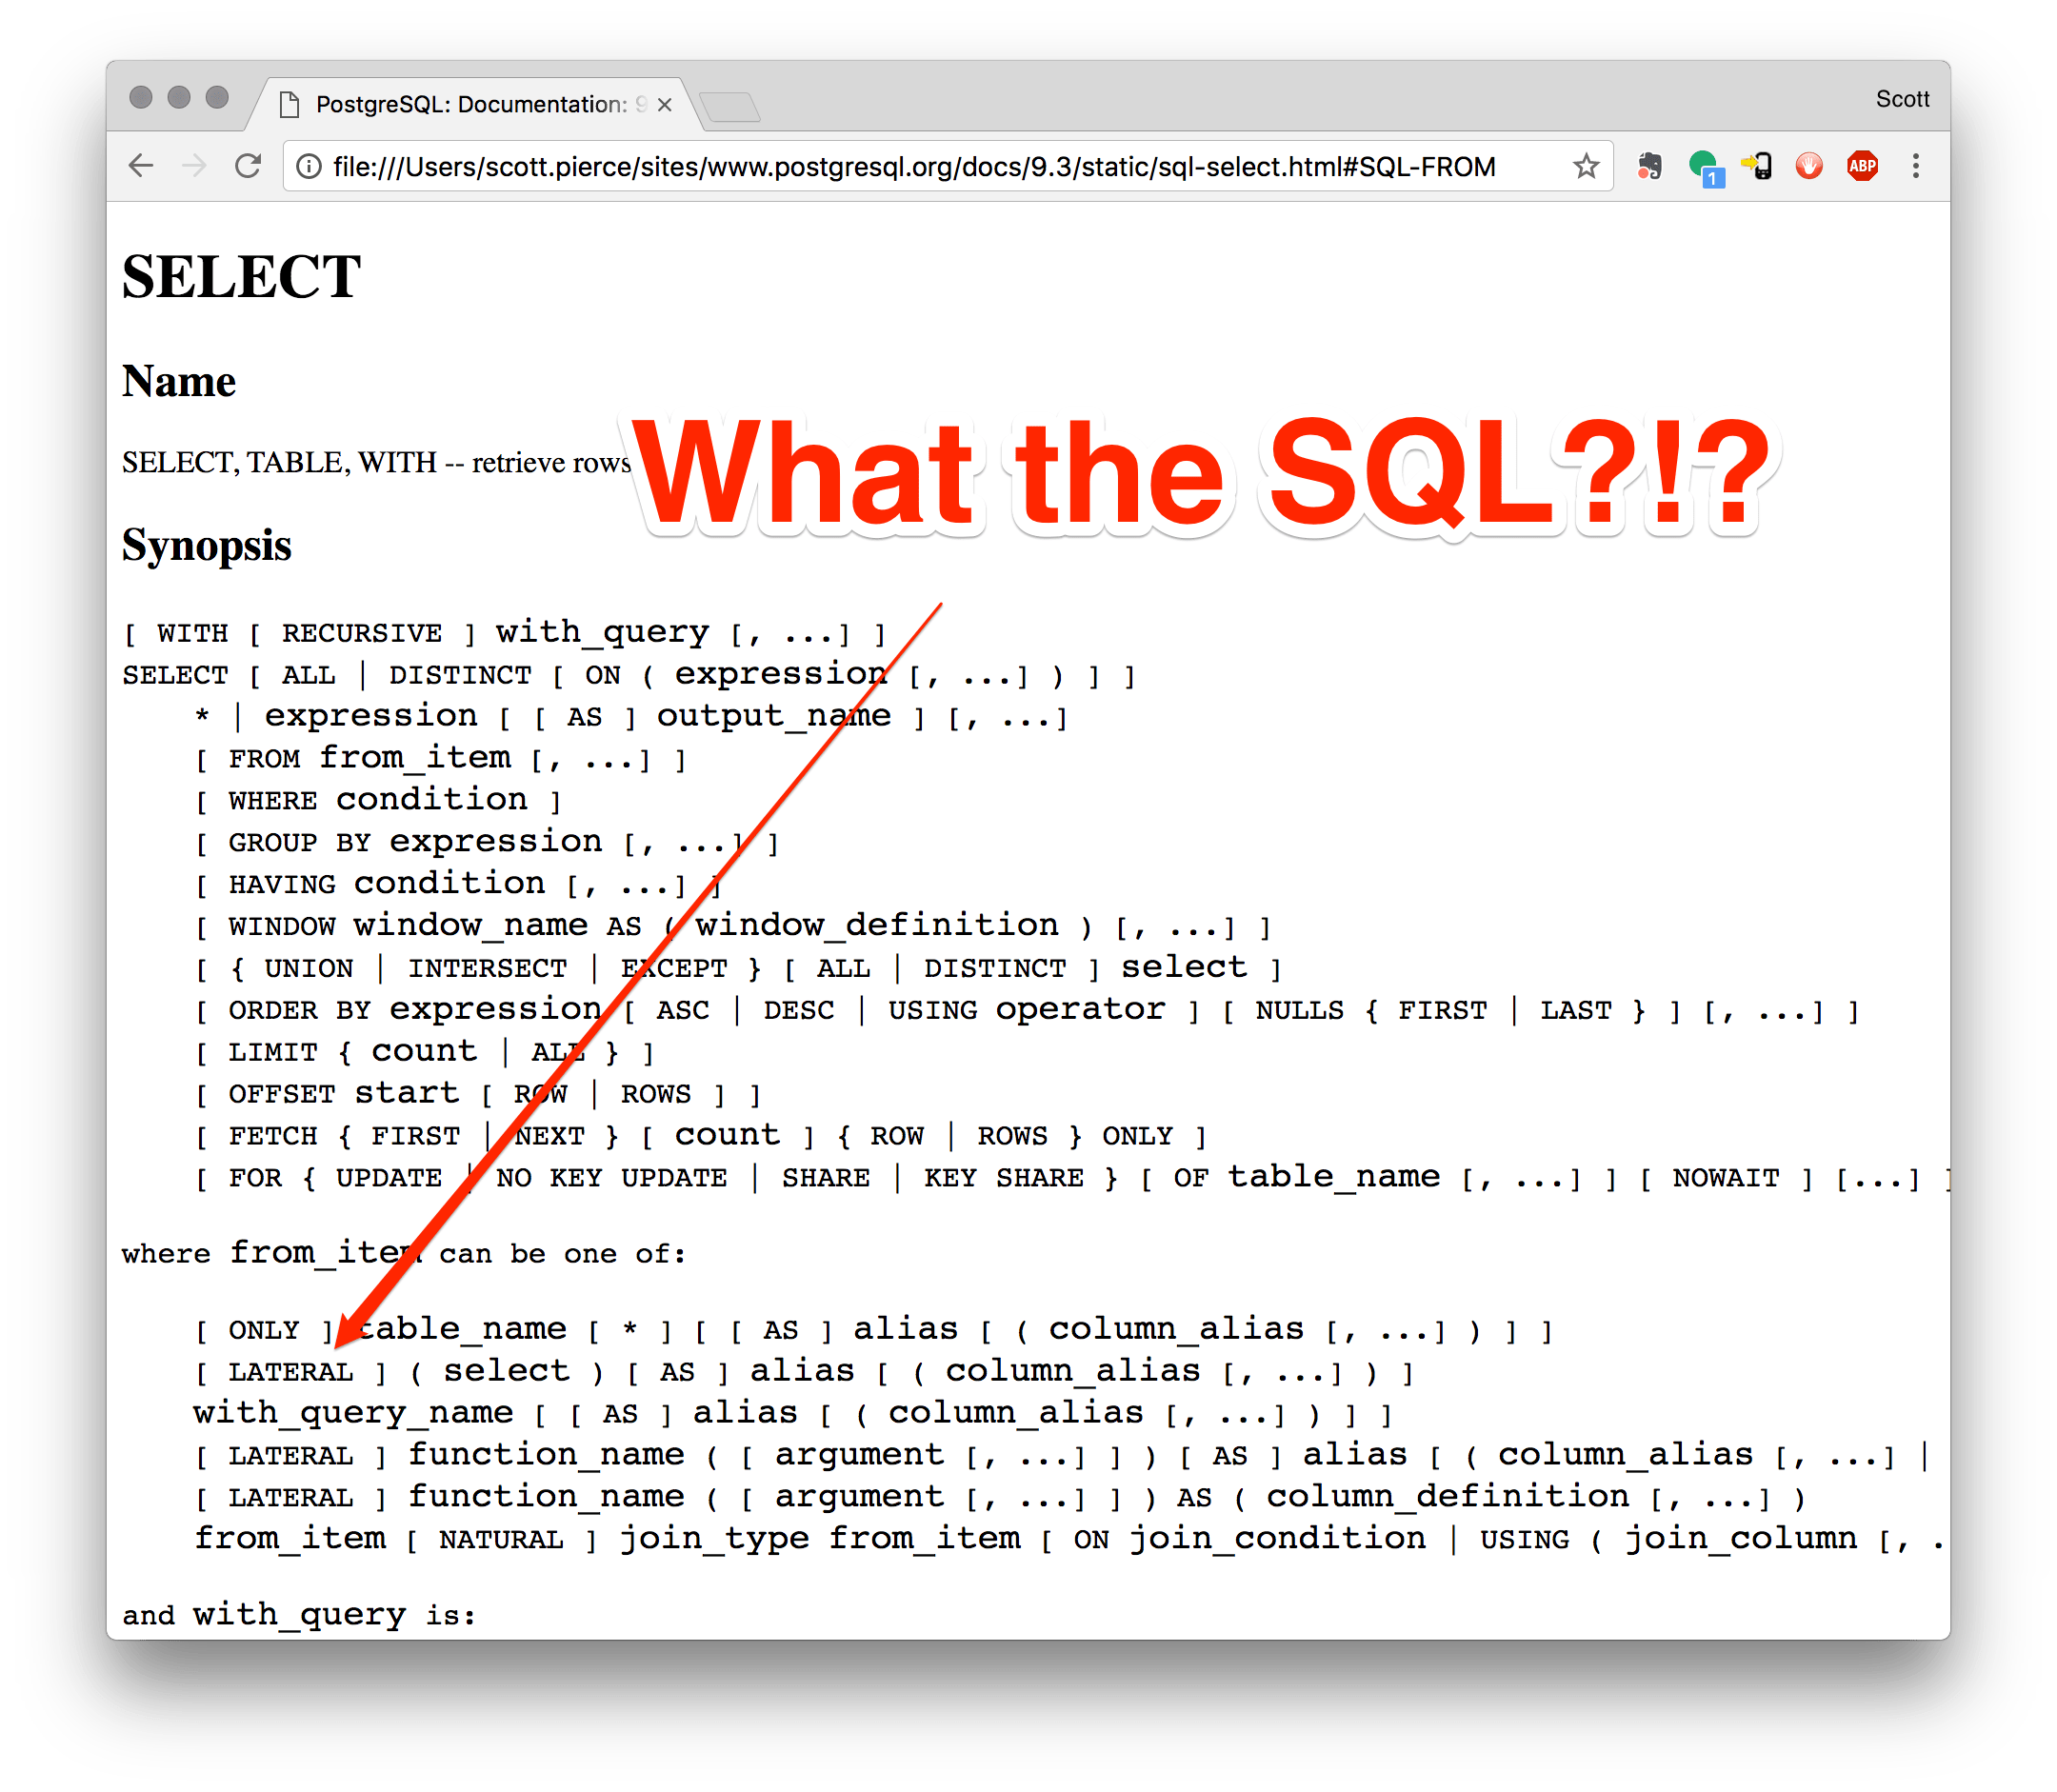 What the SQL?!? Lateral Joins